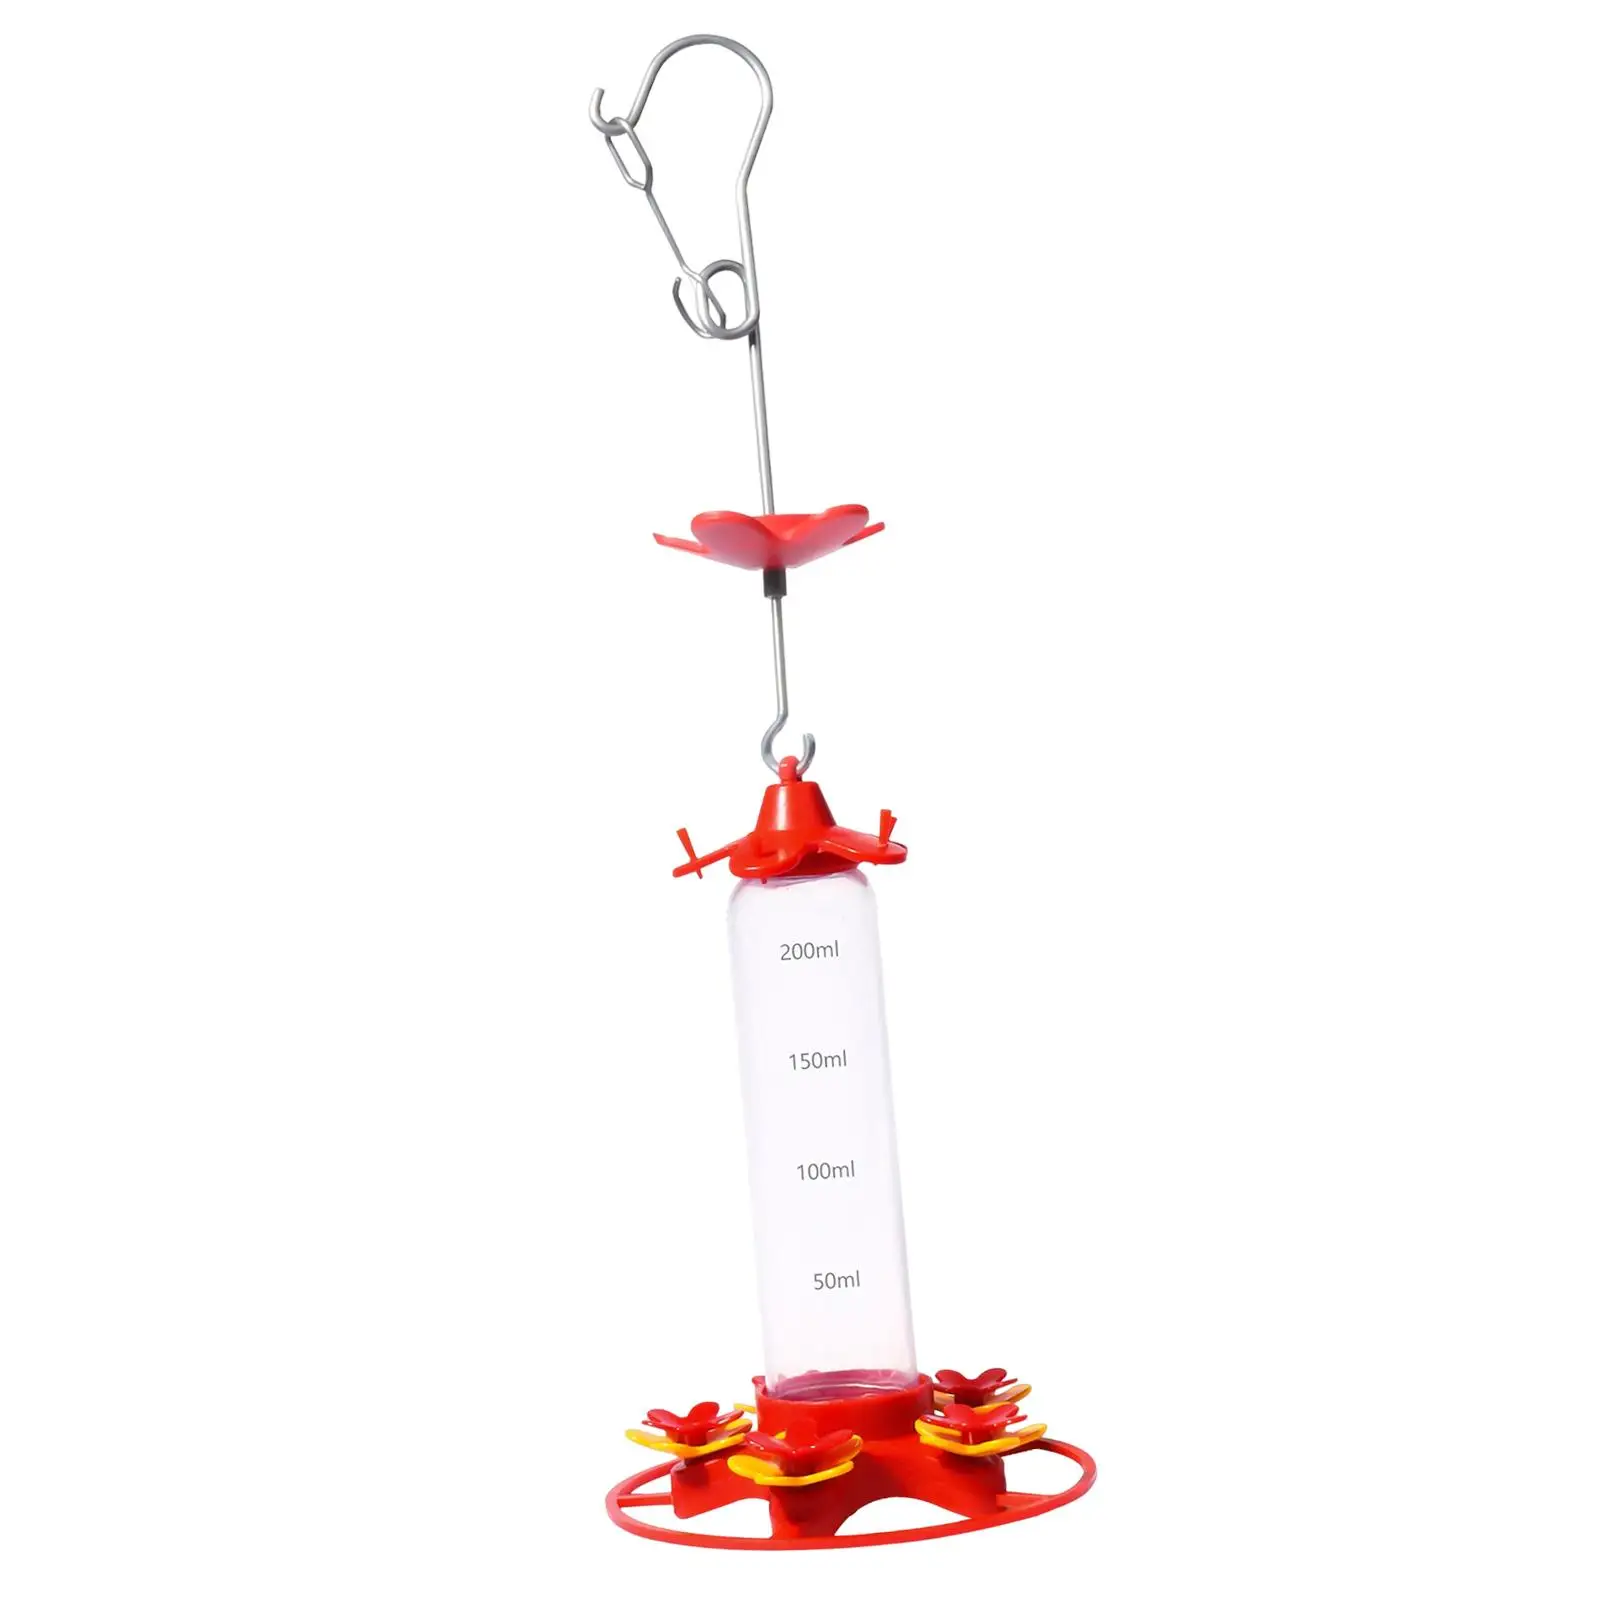 Bird Feeder 10 ounces Easy to Clean Decoration Water Feeder Station Compact Hummingbird Feeder for Outdoor Deck Yard